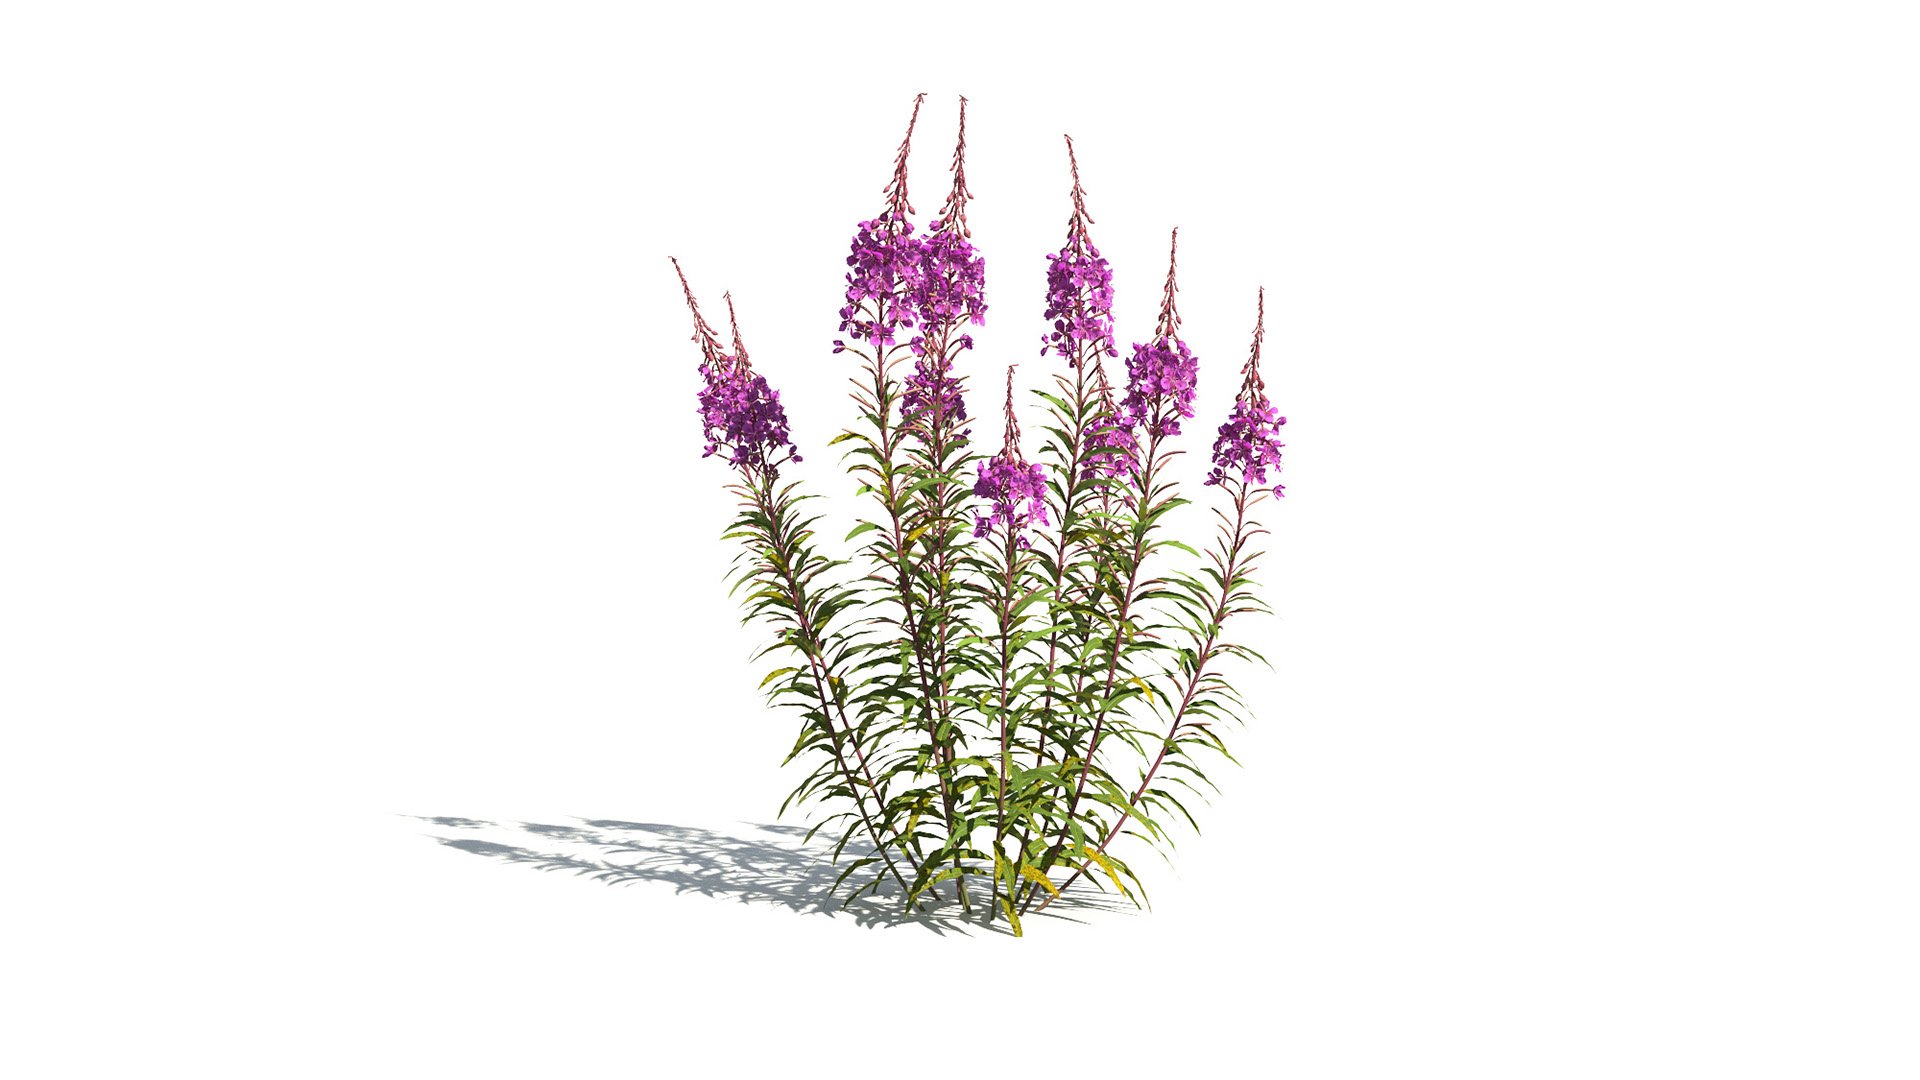 3D model of the Fireweed Chamerion angustifolium